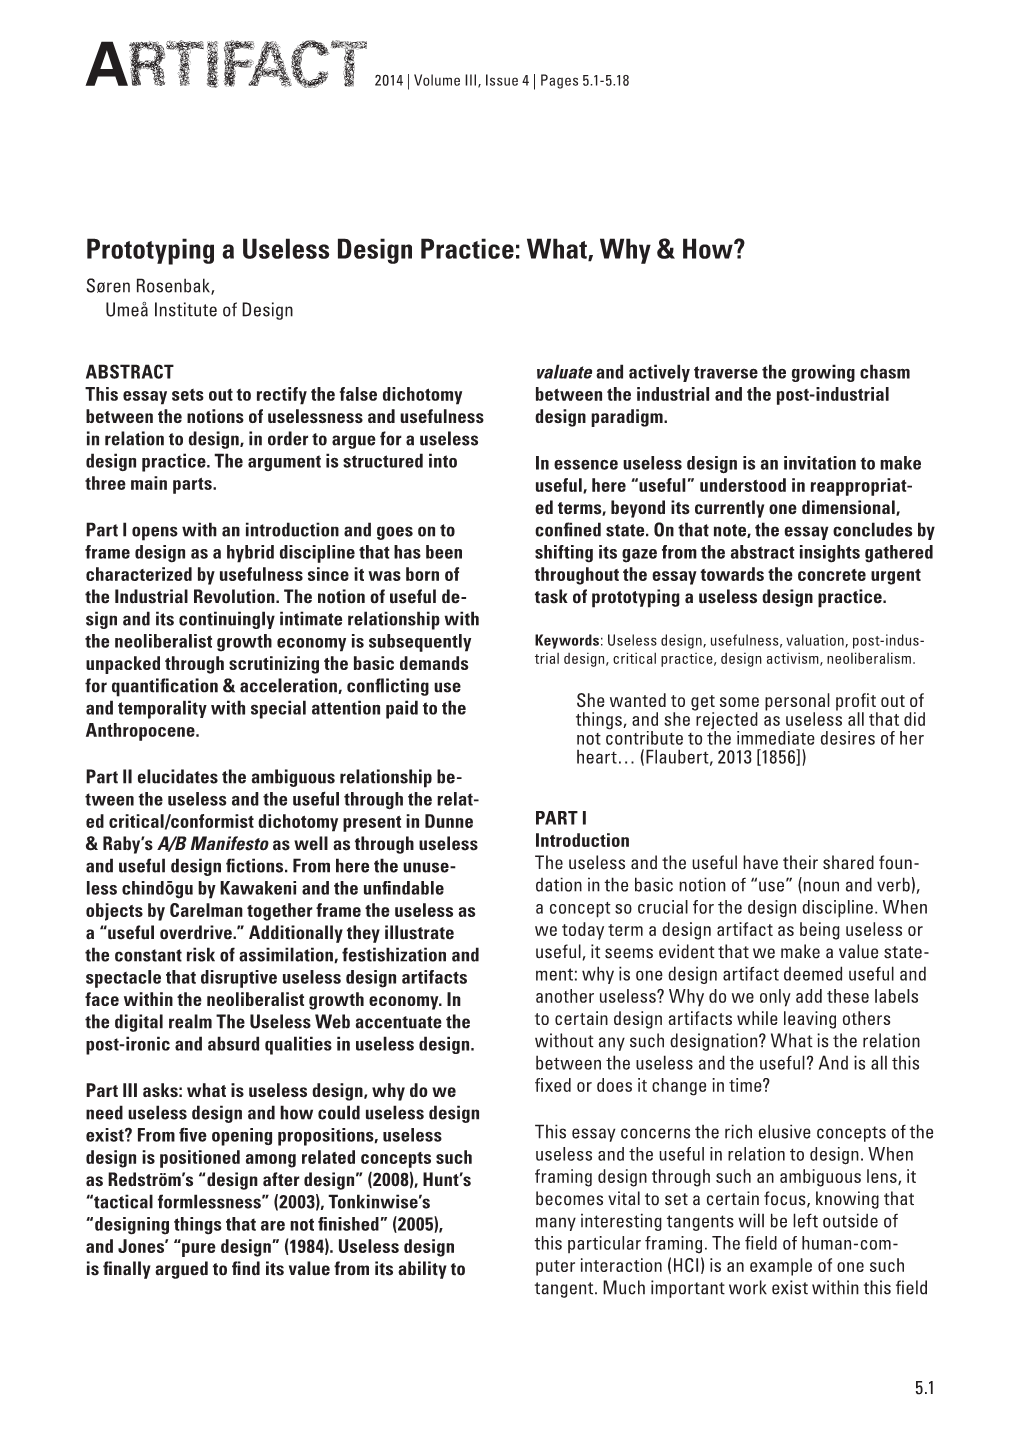 Prototyping a Useless Design Practice: What, Why & How?